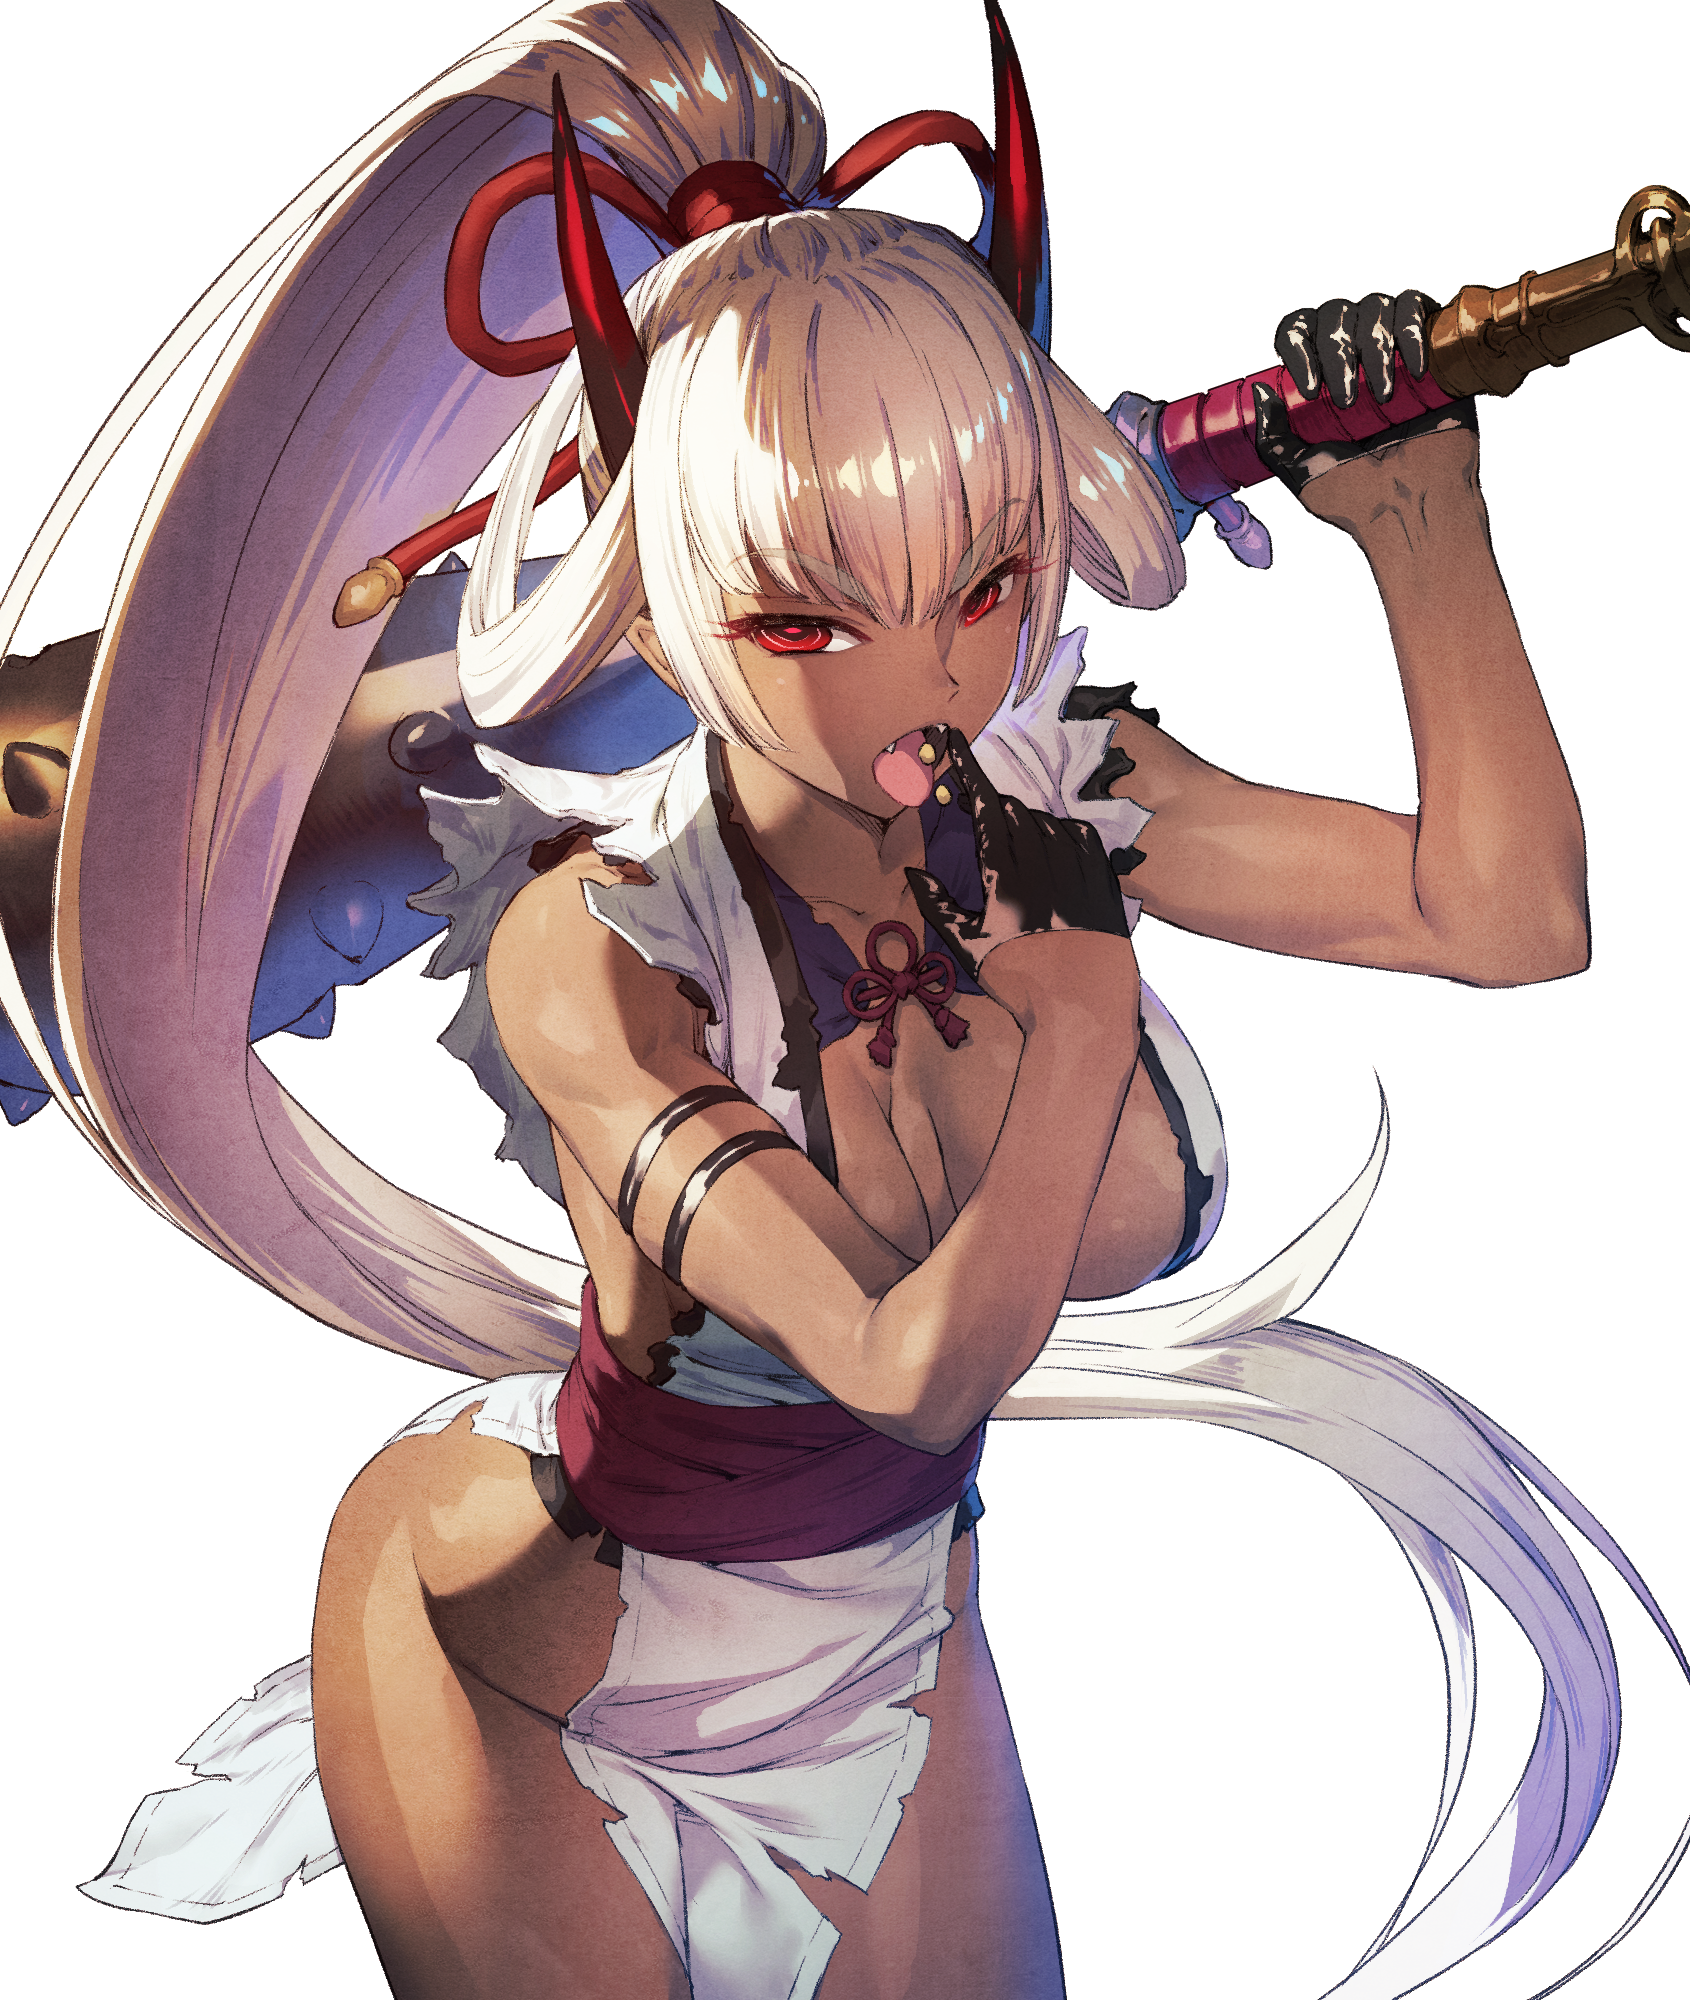 Anime 1690x2000 anime girls anime original characters Chyko weapon clubs dark skin horns red eyes silver hair ponytail torn clothes nopan no bra